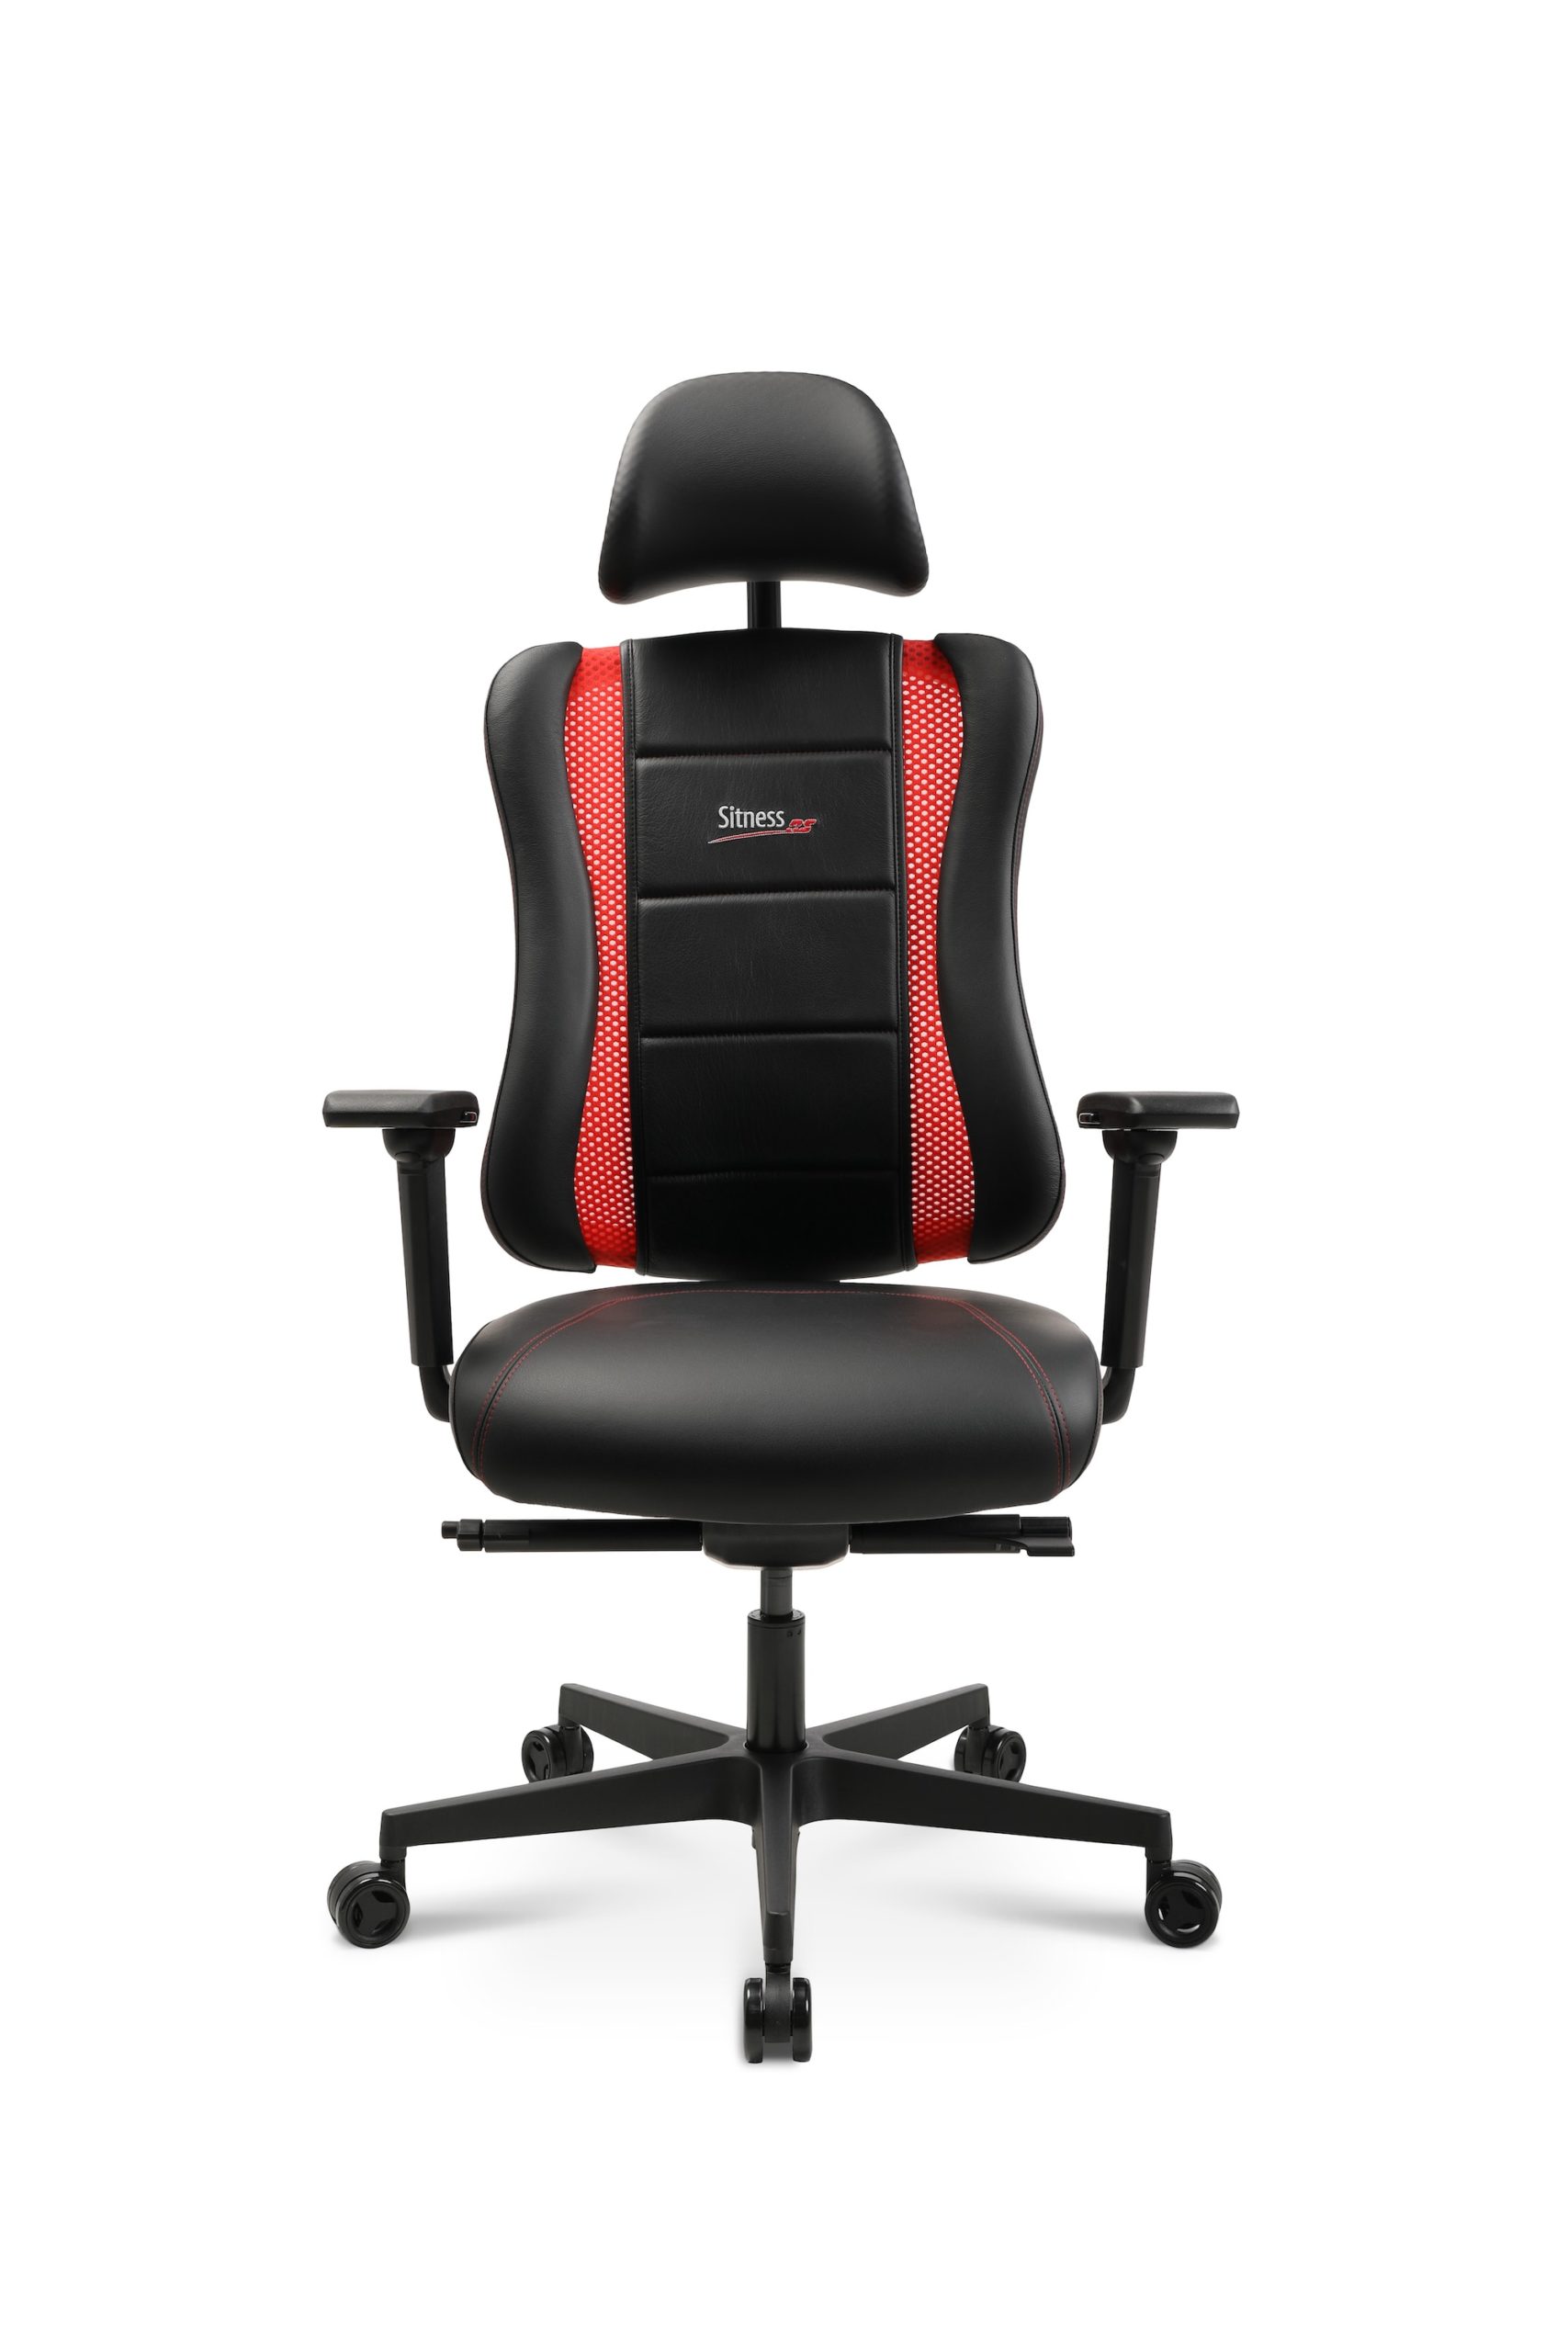 Sitness RS Pro - Black & Red